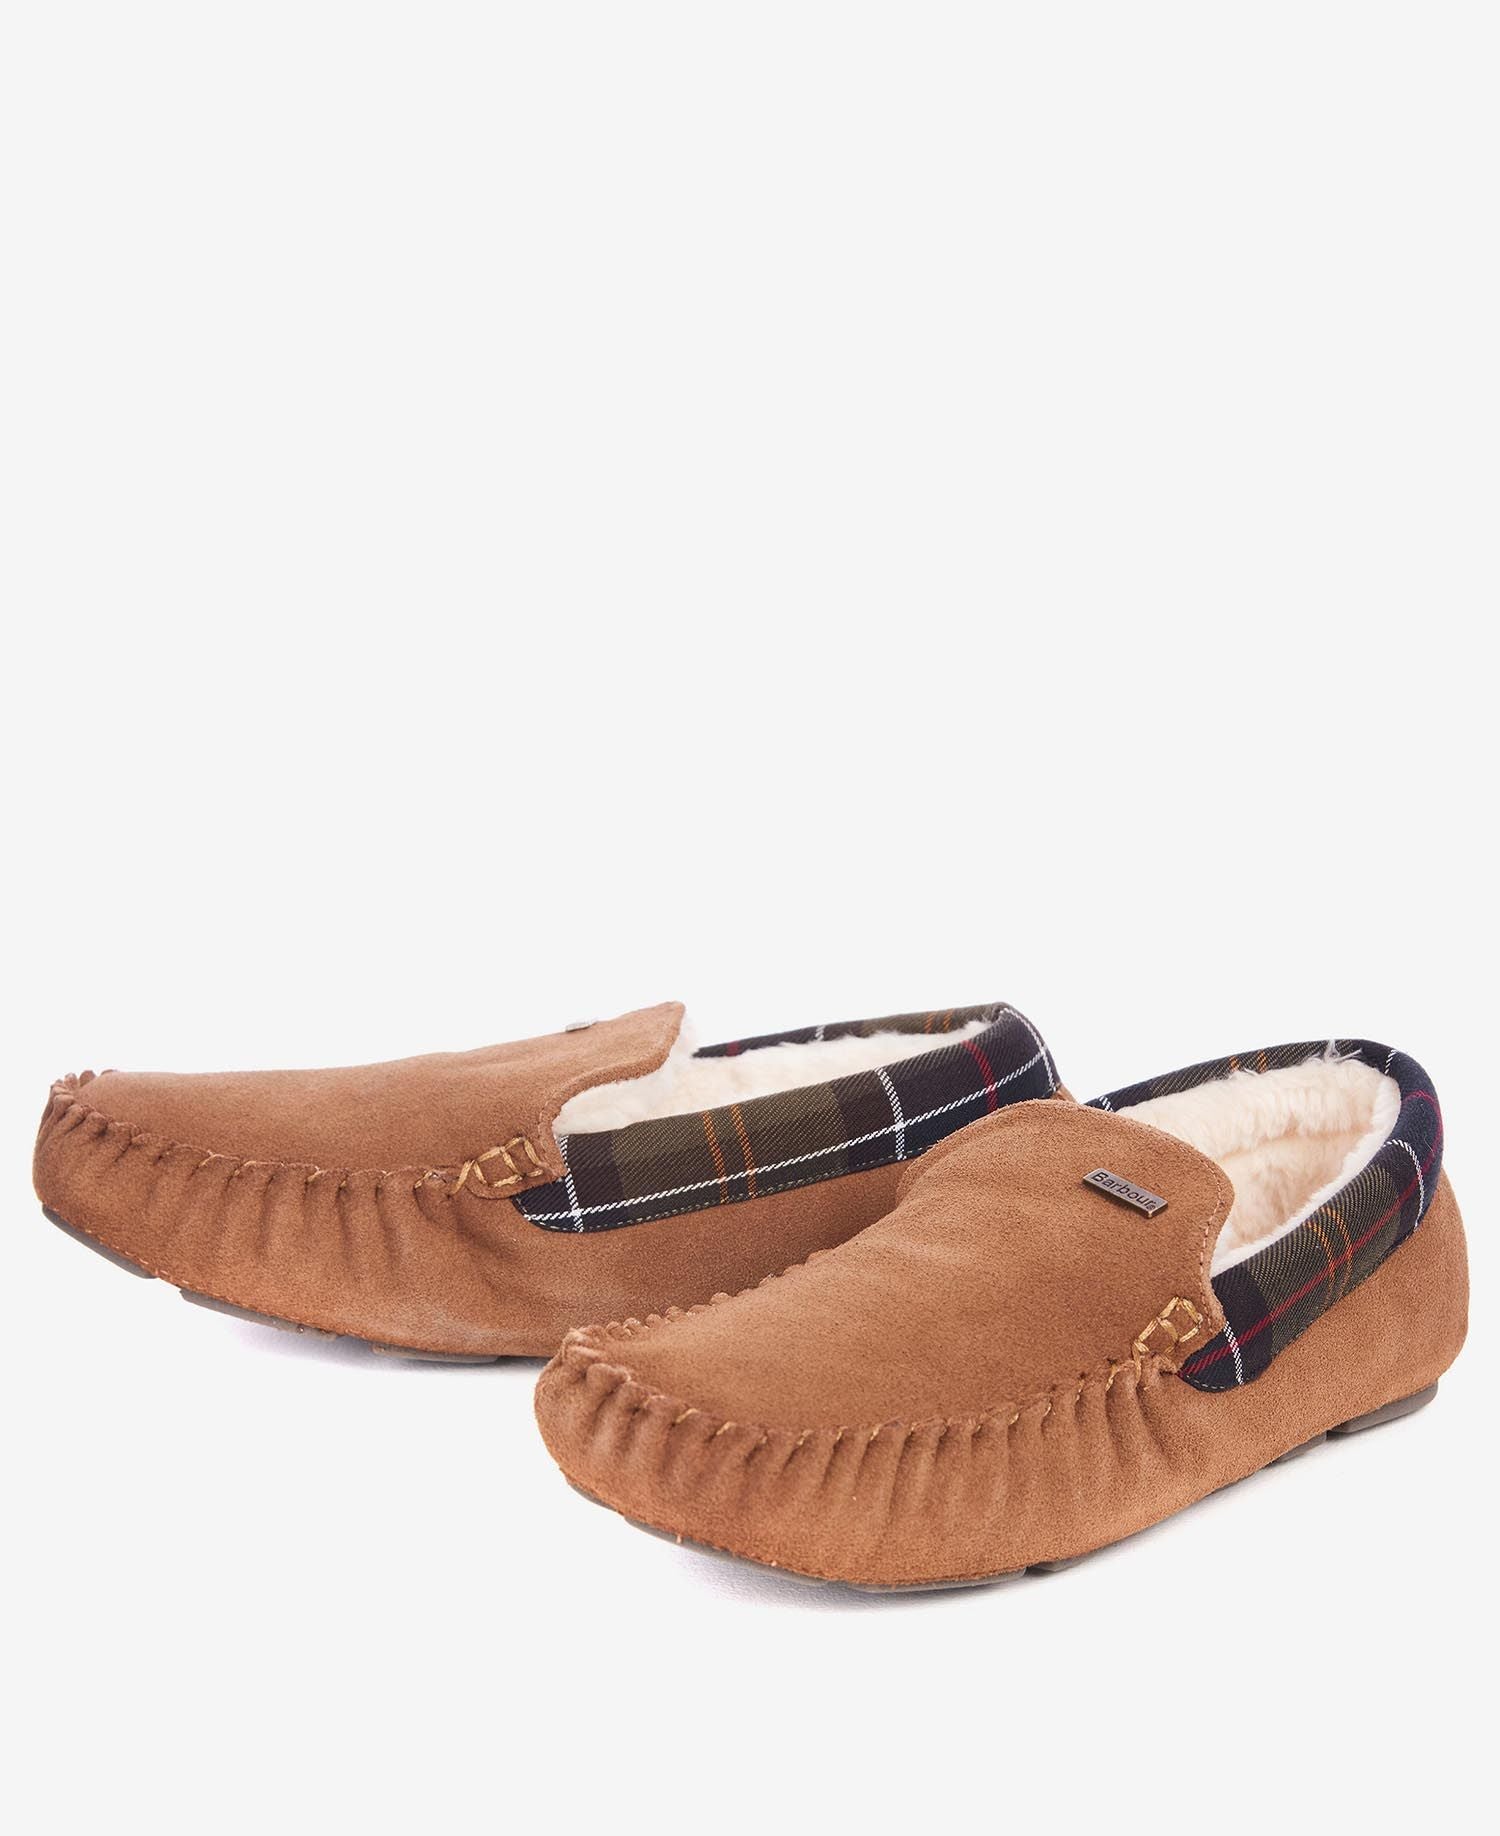 Monty Slippers - Camel Suede